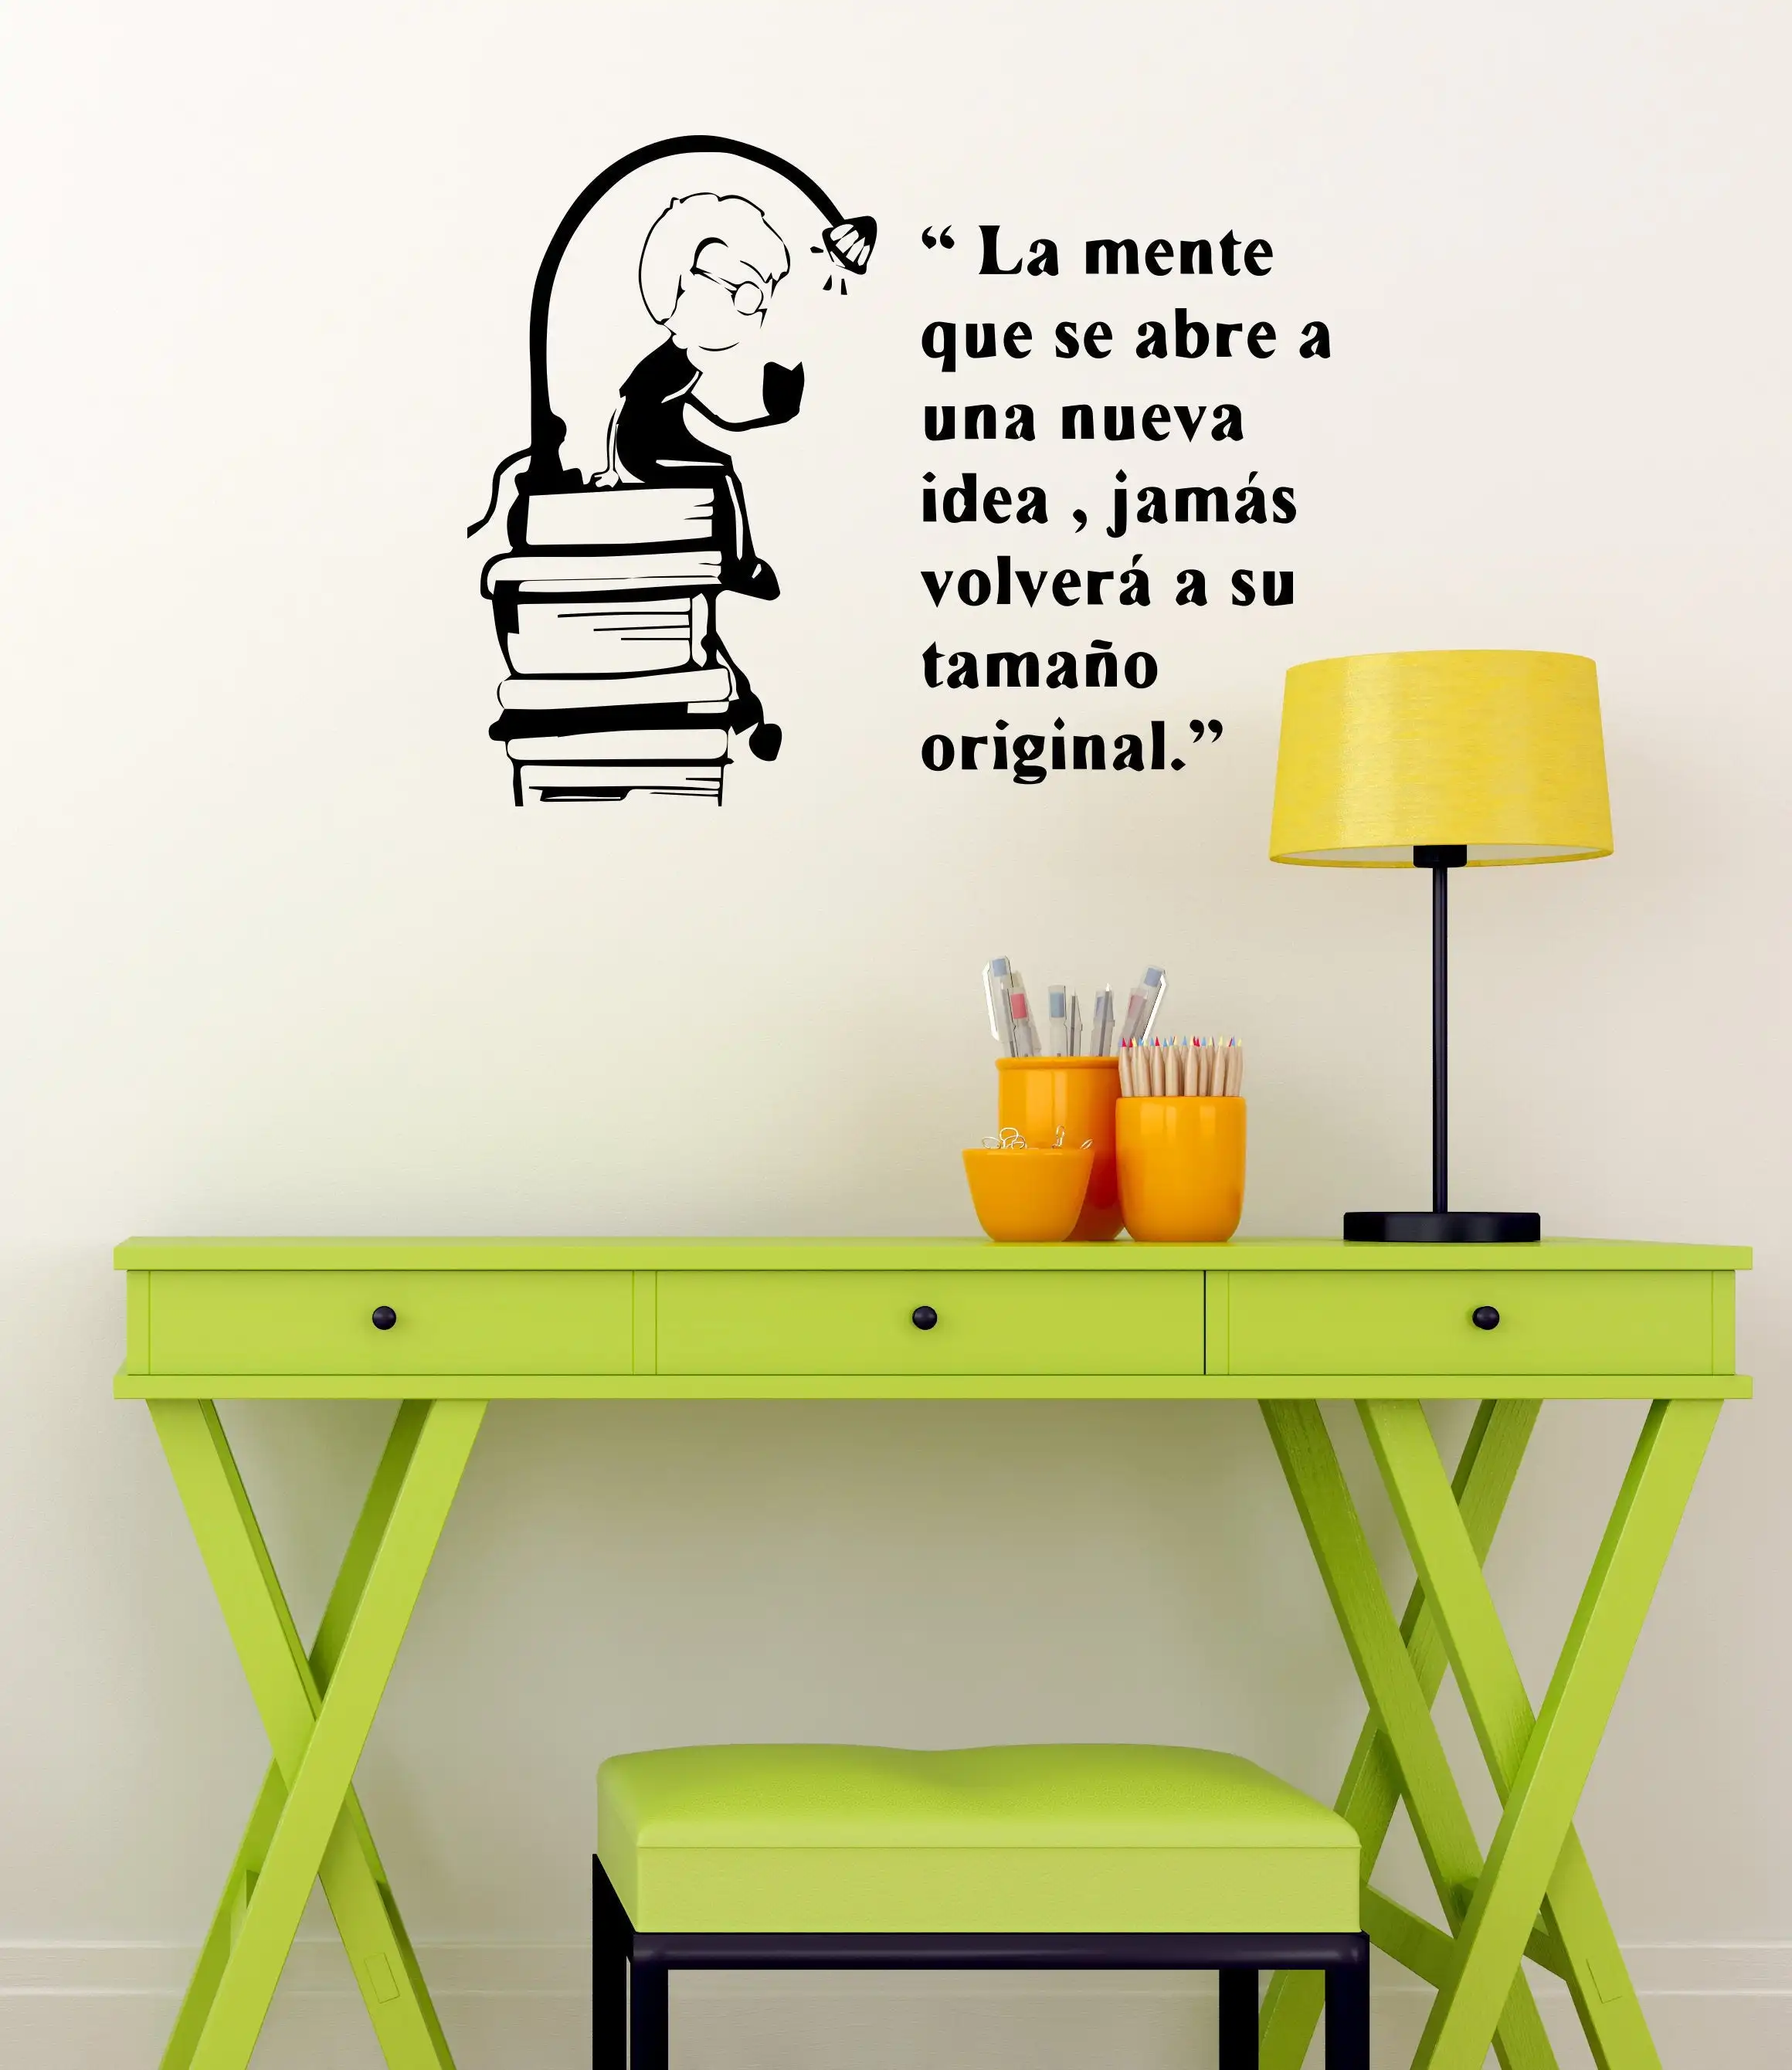 

Spanish Books Quote Wall Decal Vinyl Boy Reading Study Wall Decal Reading Room Boy Bedroom Decoration Removable Wall Decor Z851